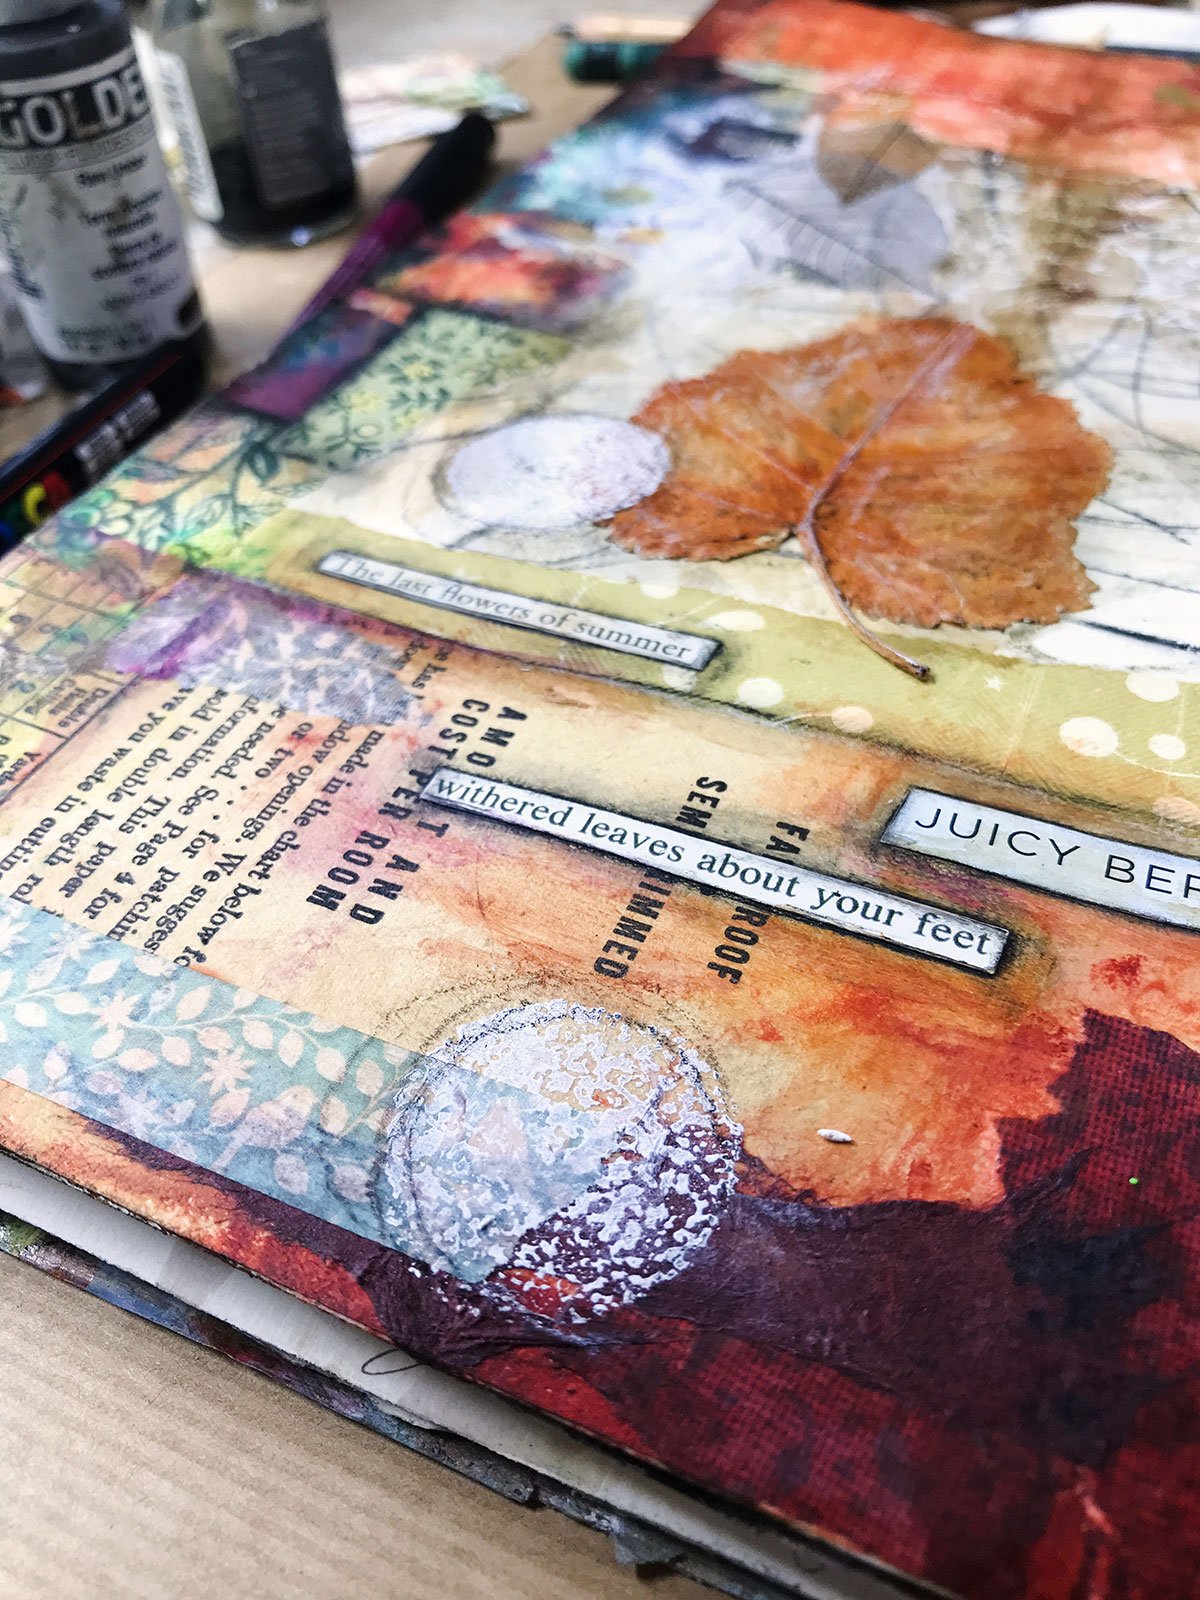 Art journal challenge — Laly Mille Mixed Media Art